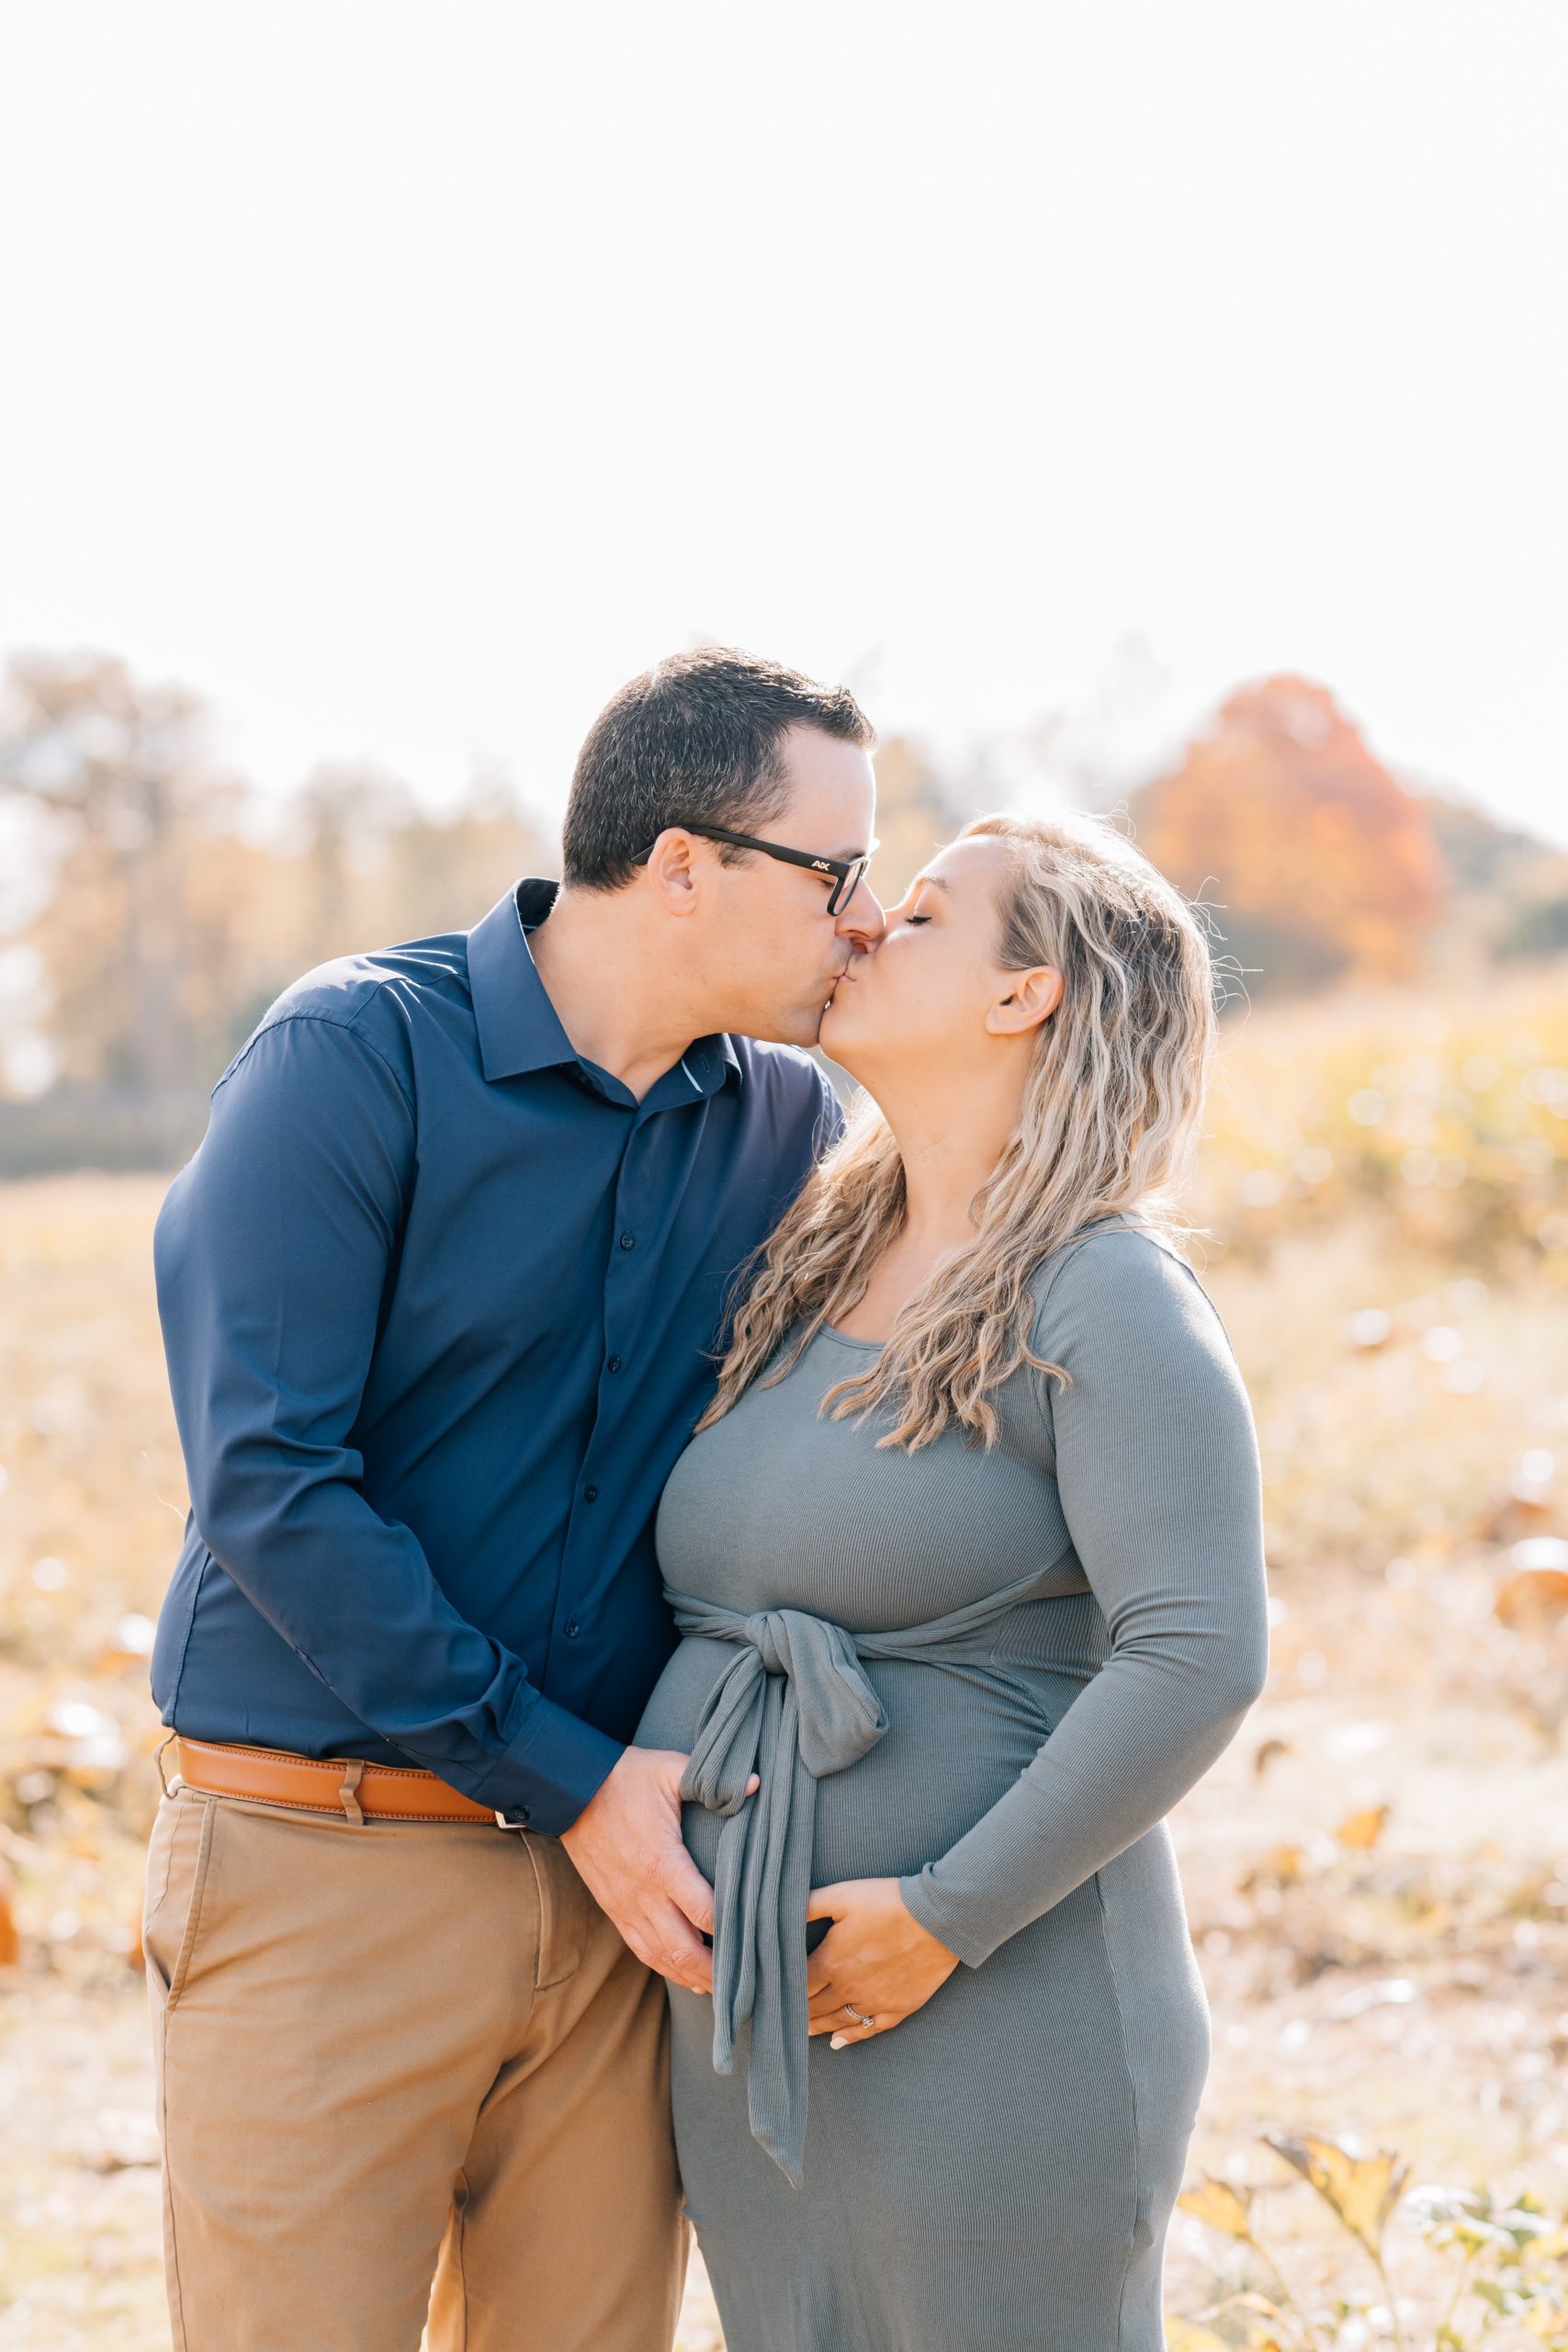 Flemington Fall Mini Session | Maternity Photoshoot NJ | The D'Angiolillo Family mom and dad kiss in pumpkin patch holding hands on baby bump